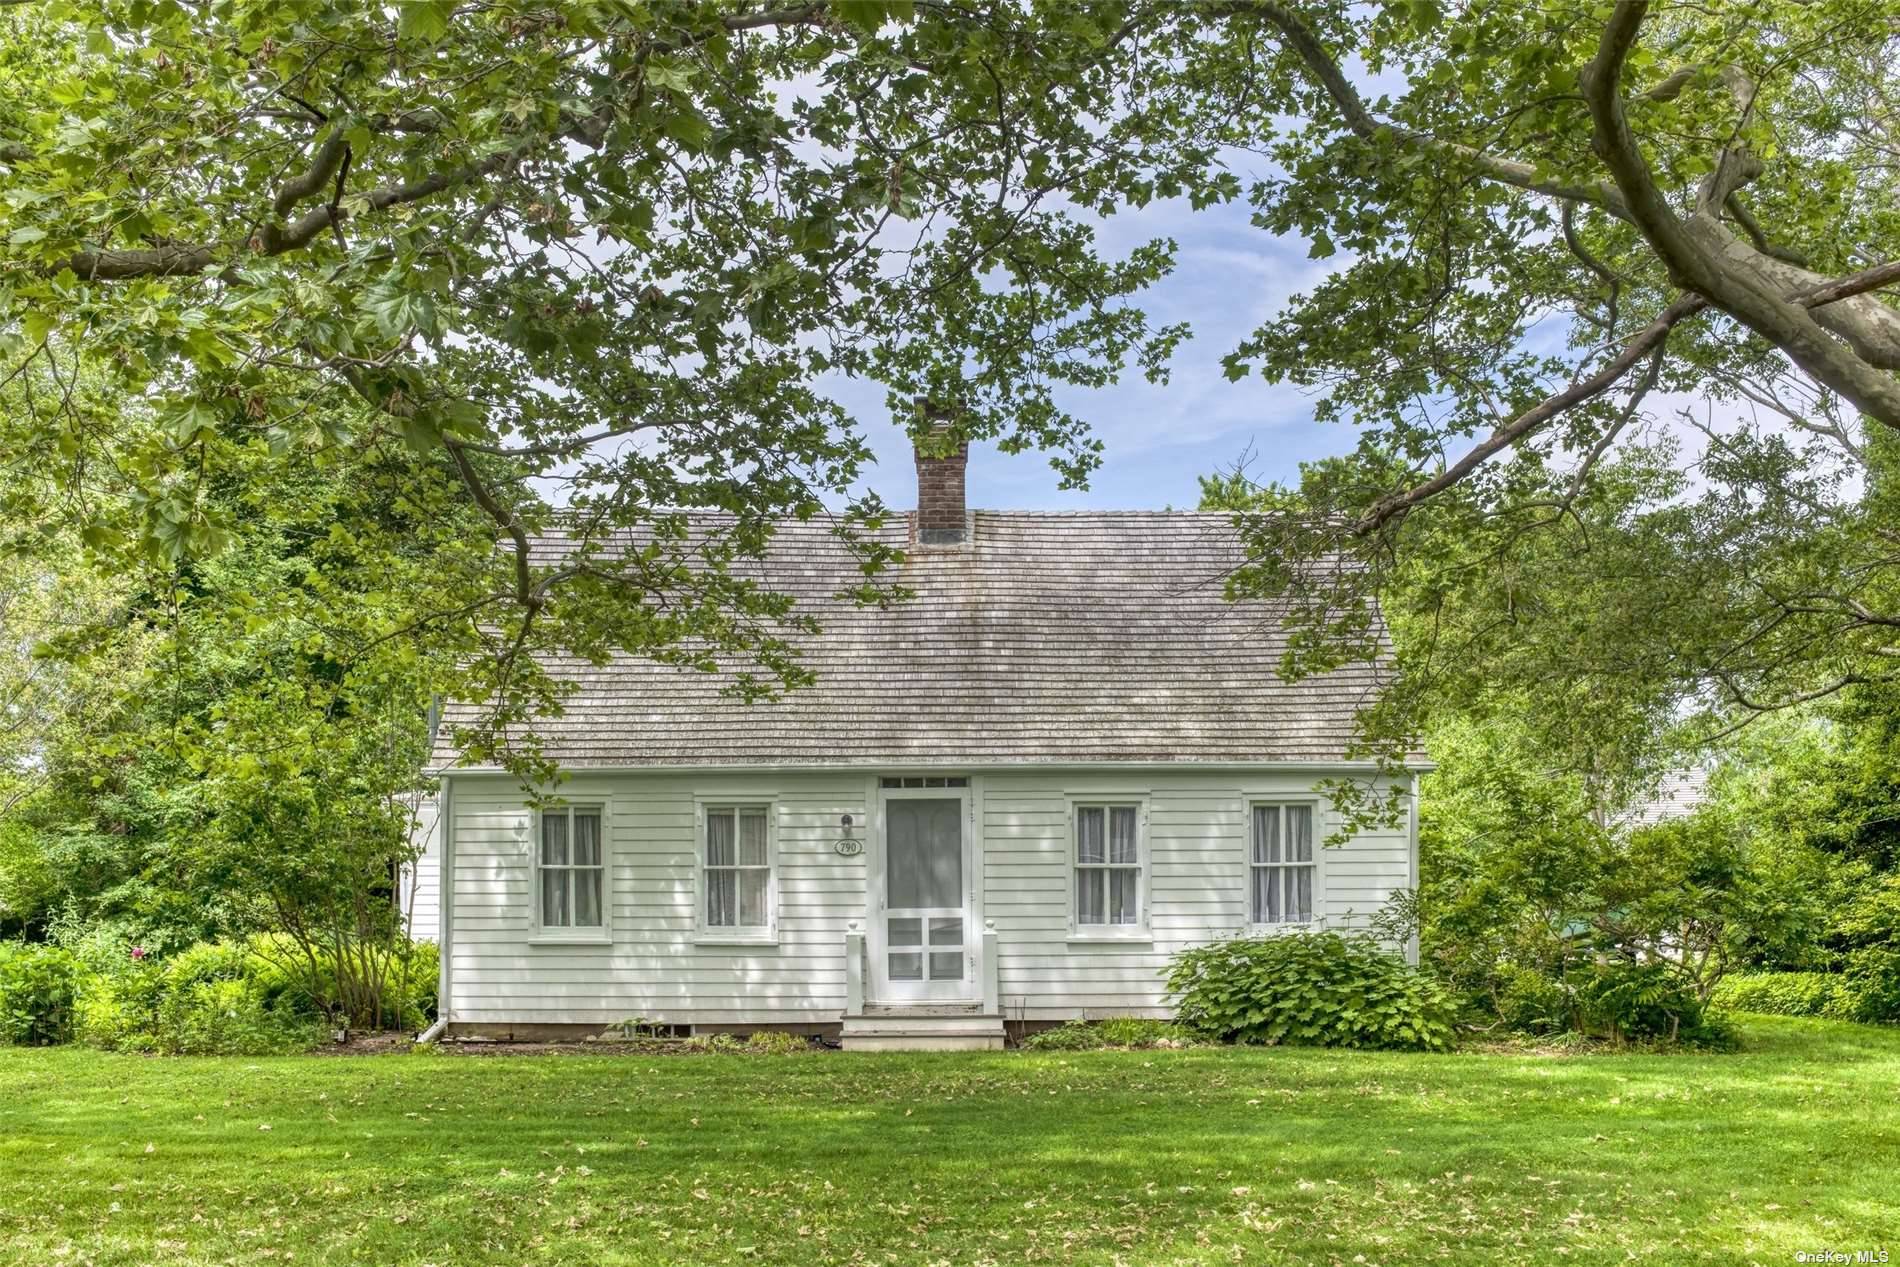 Authentic 1770 Cottage in the heart of Orient Village.